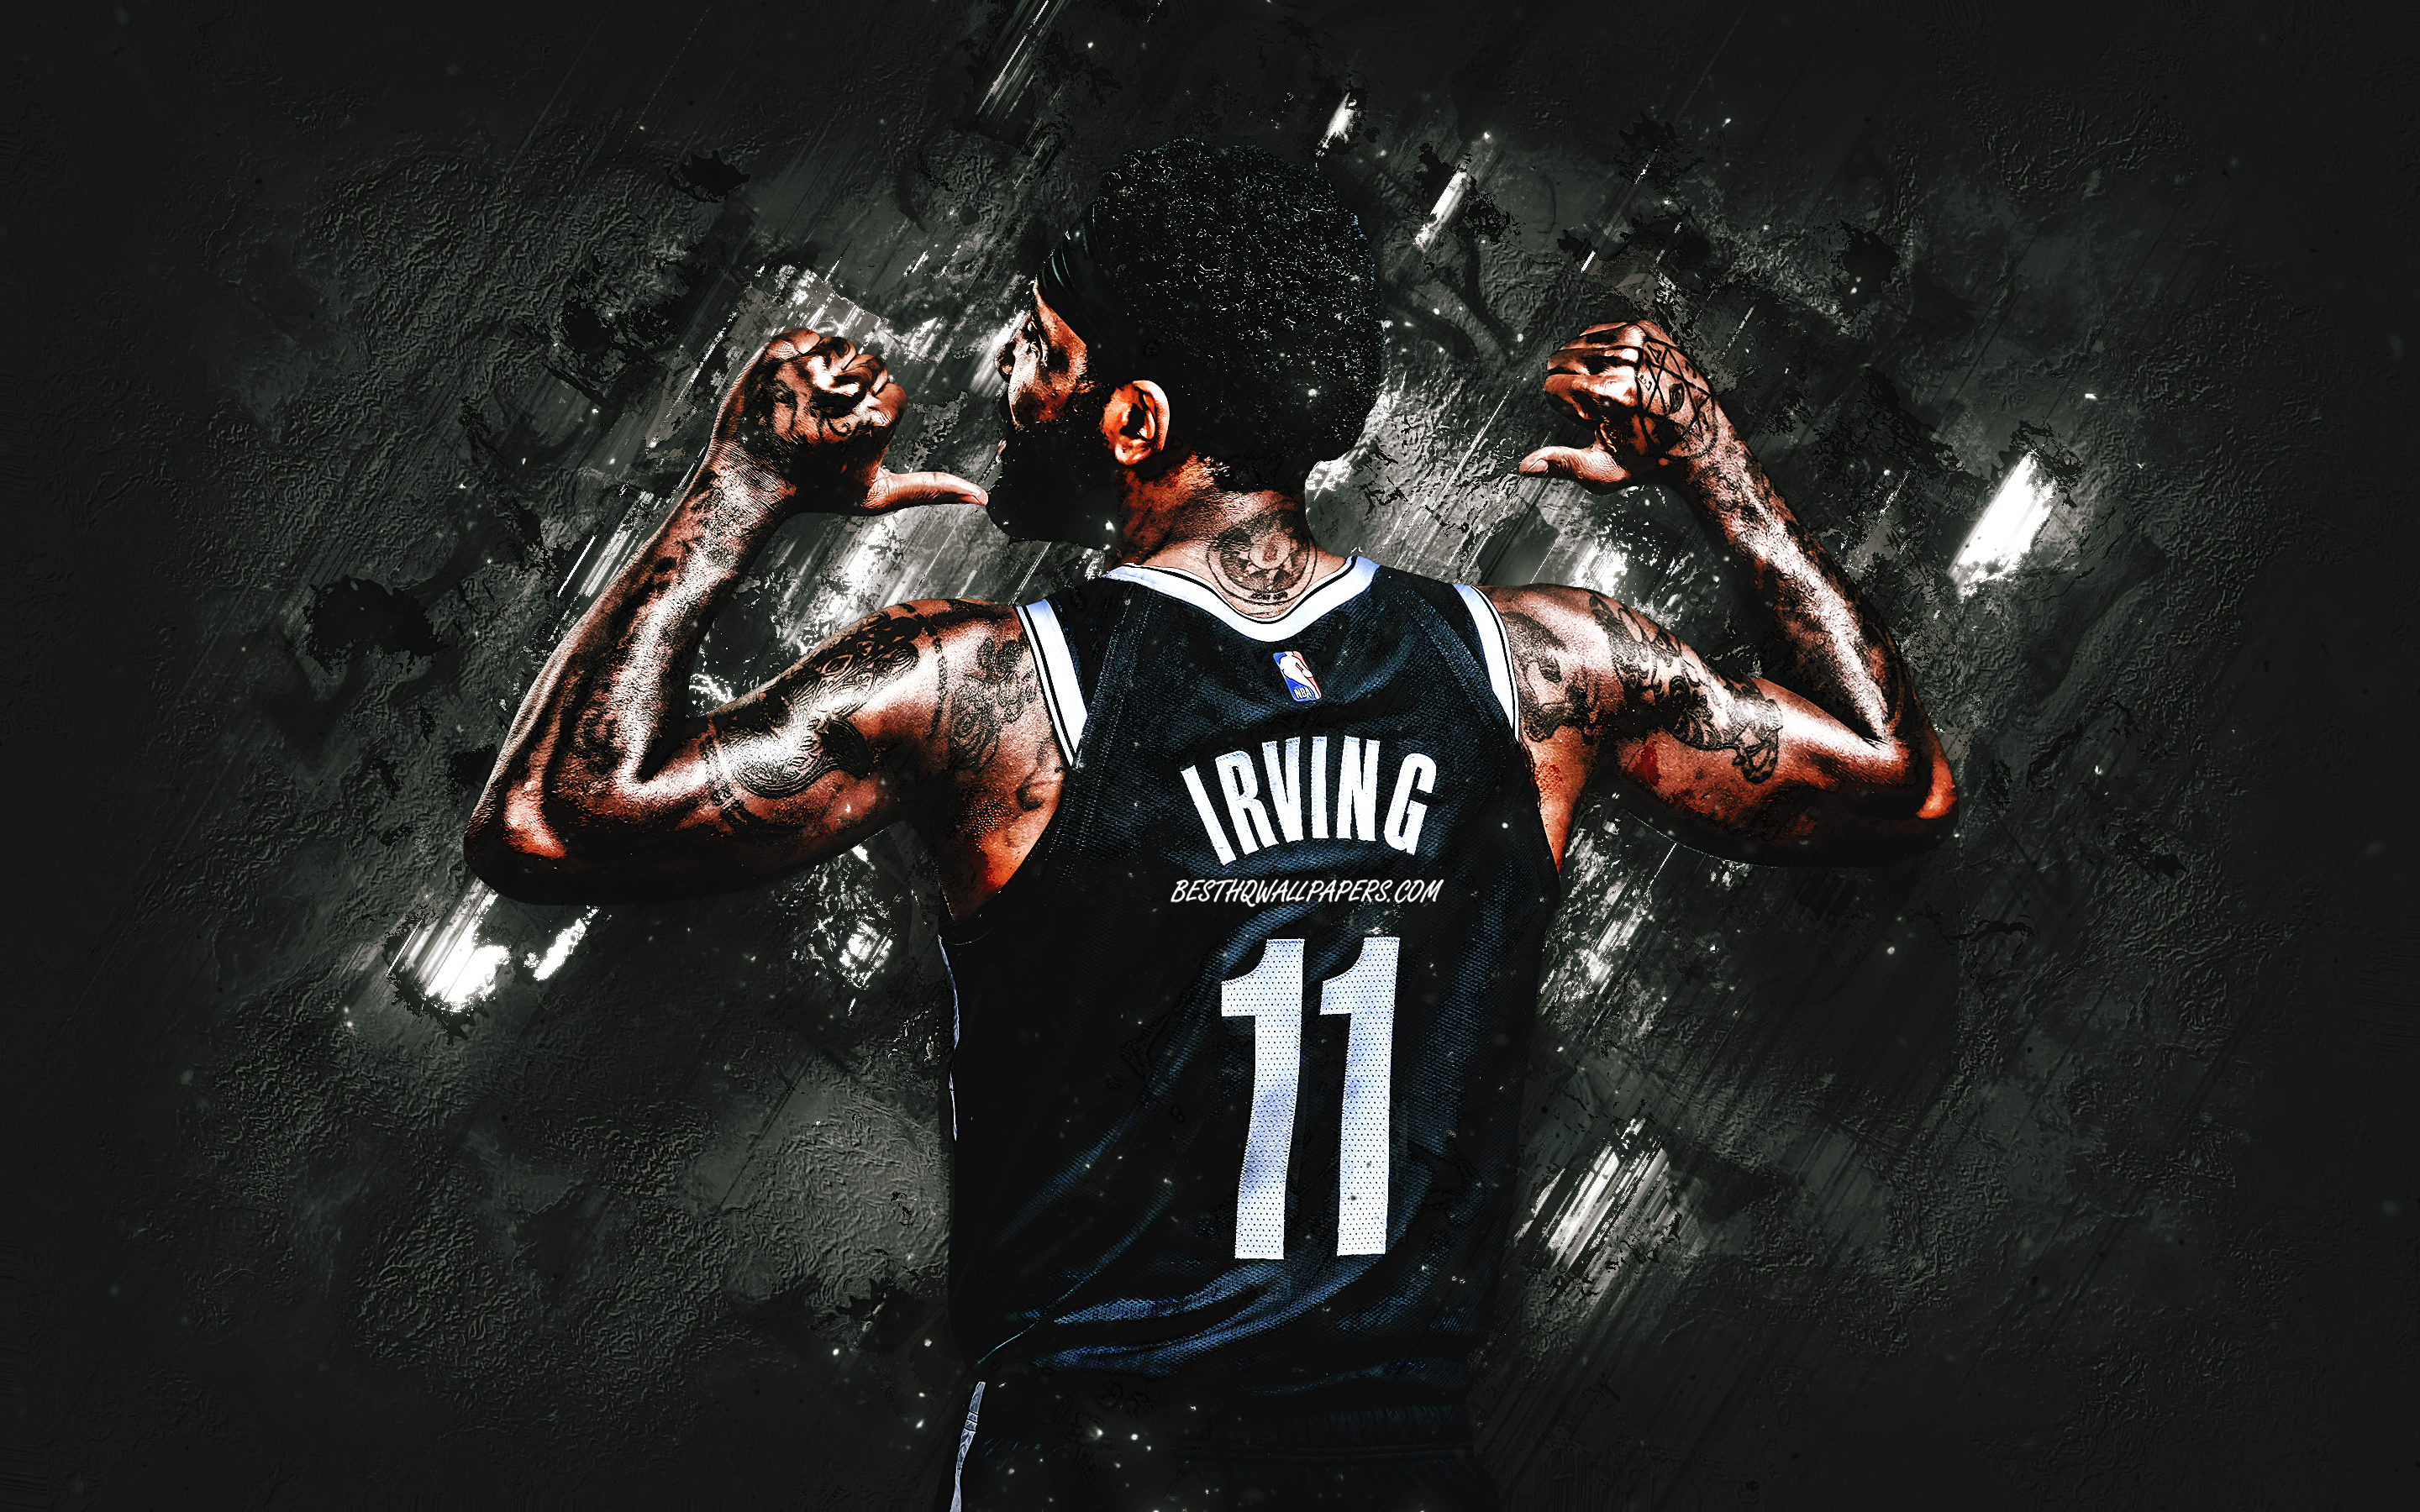 Download wallpapers kyrie irving nba brooklyn nets american basketball player black stone background basketball for desktop with resolution x high quality hd pictures wallpapers